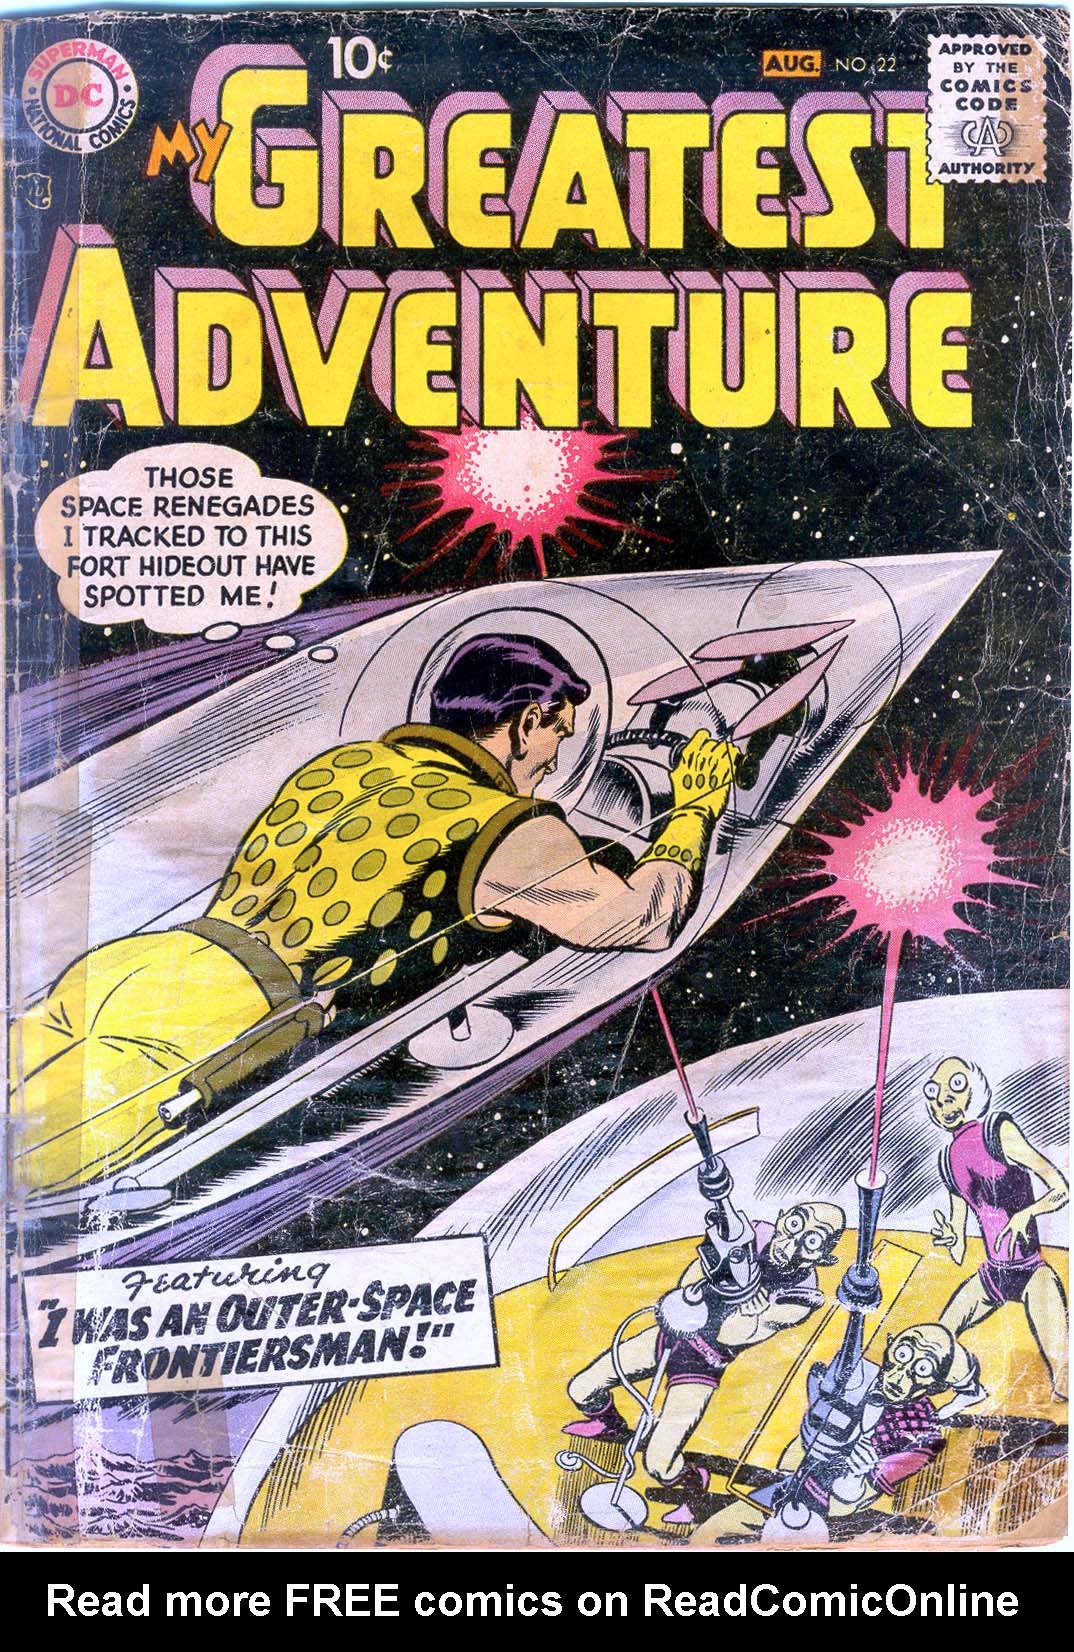 My Greatest Adventure (1955) issue 22 - Page 1